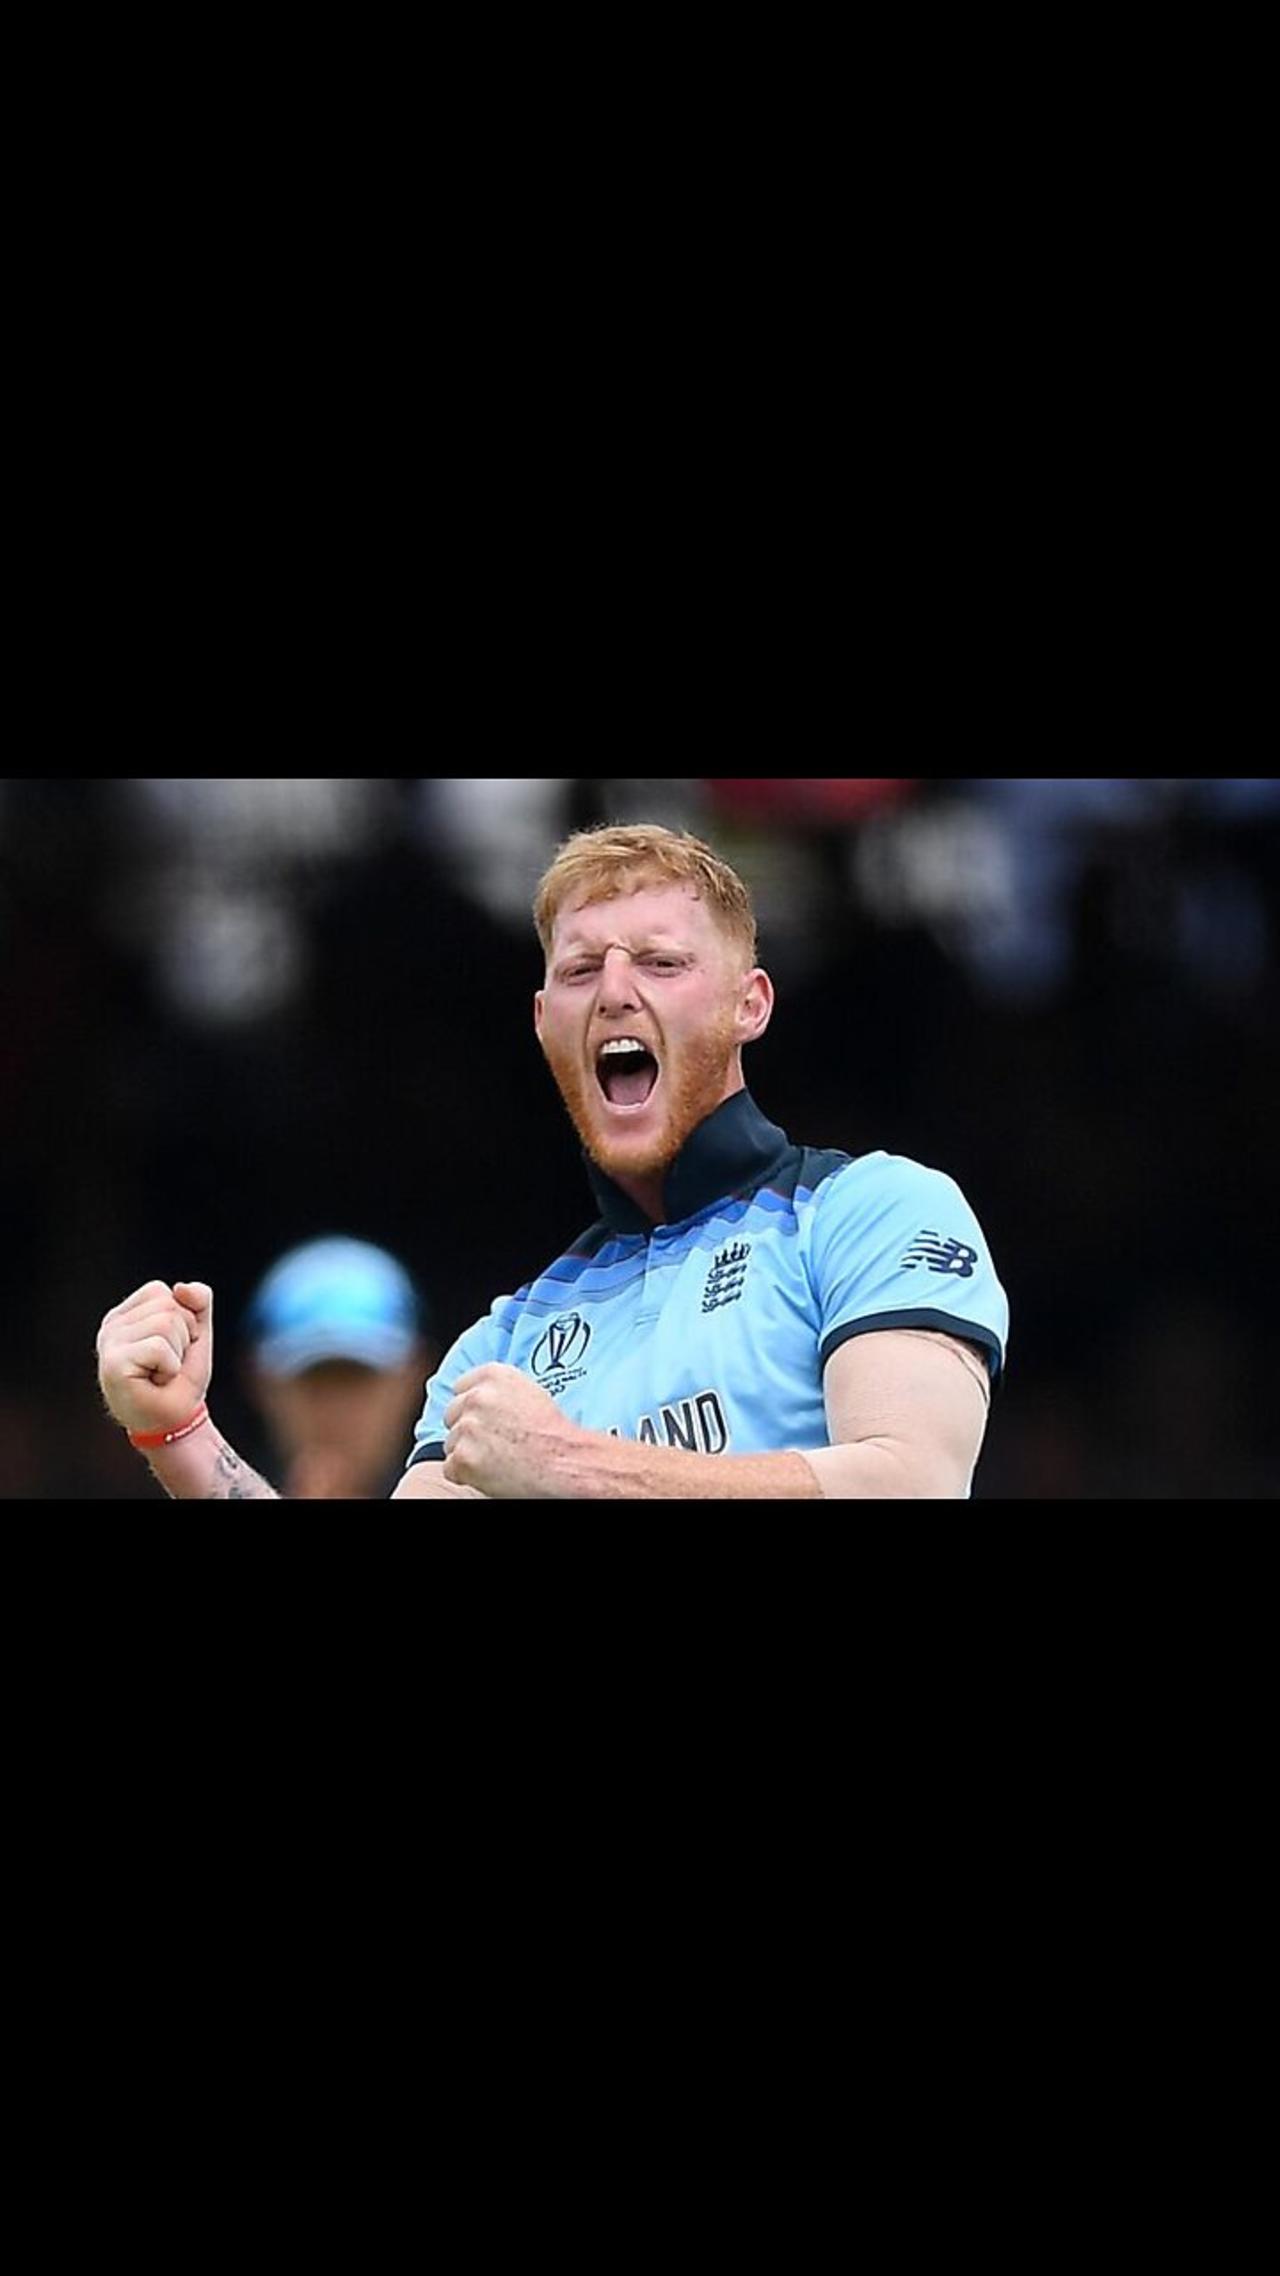 Call a friend, Ben Stokes is back (Lol) 👀